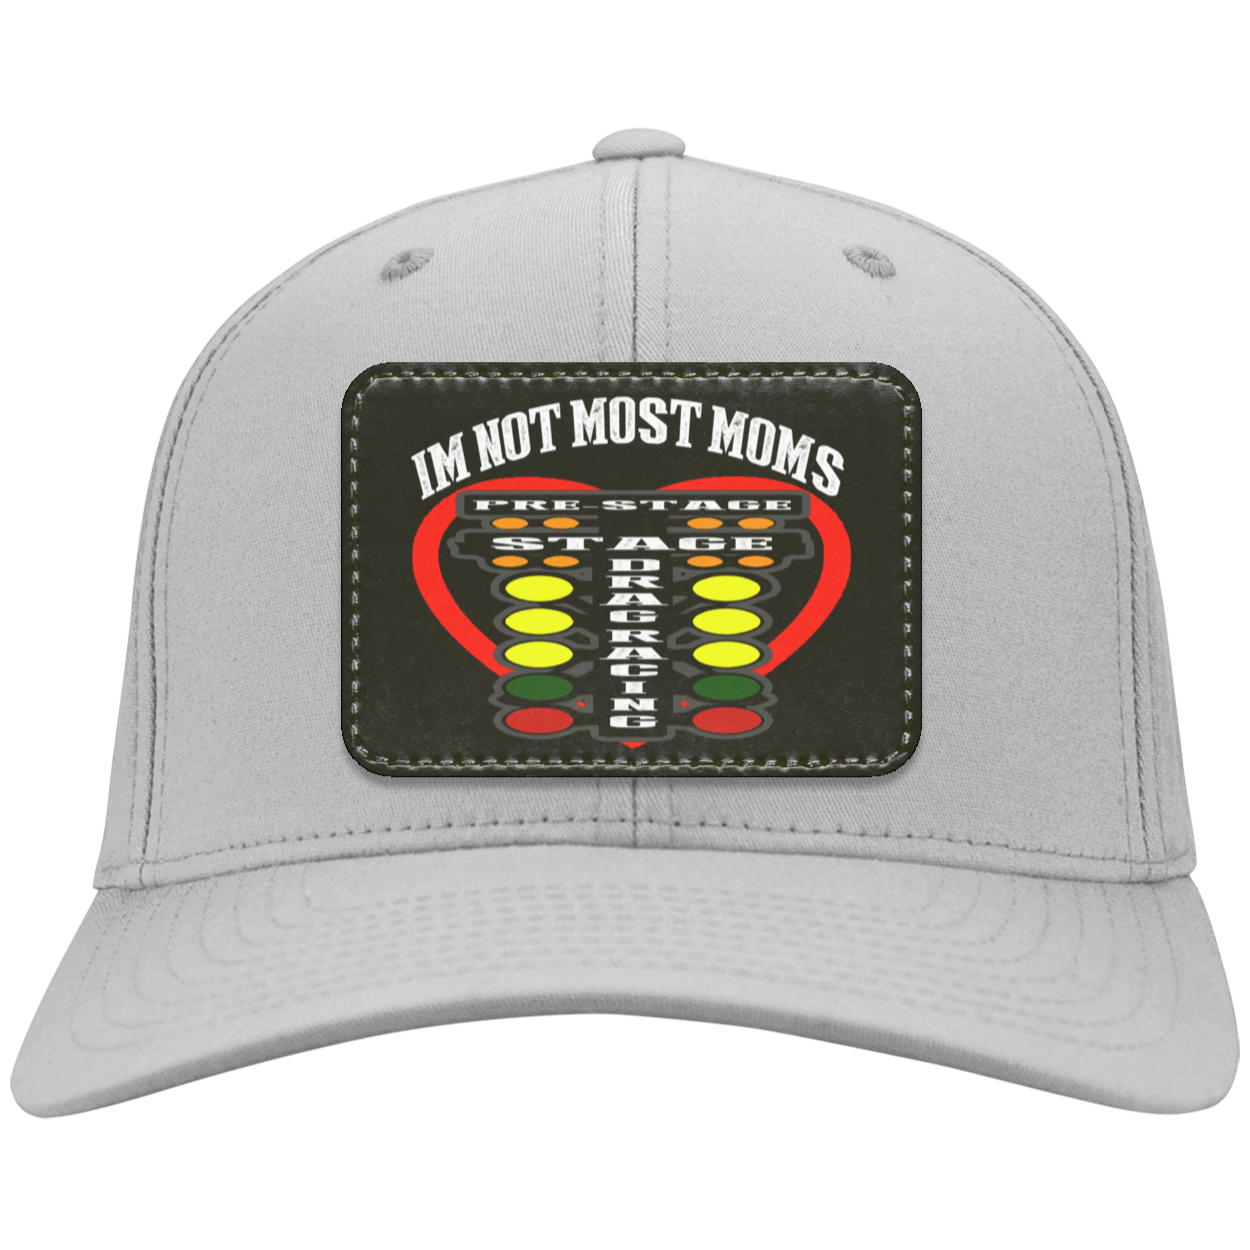 I'm Not Most Moms Drag Racing Twill Cap - Patch